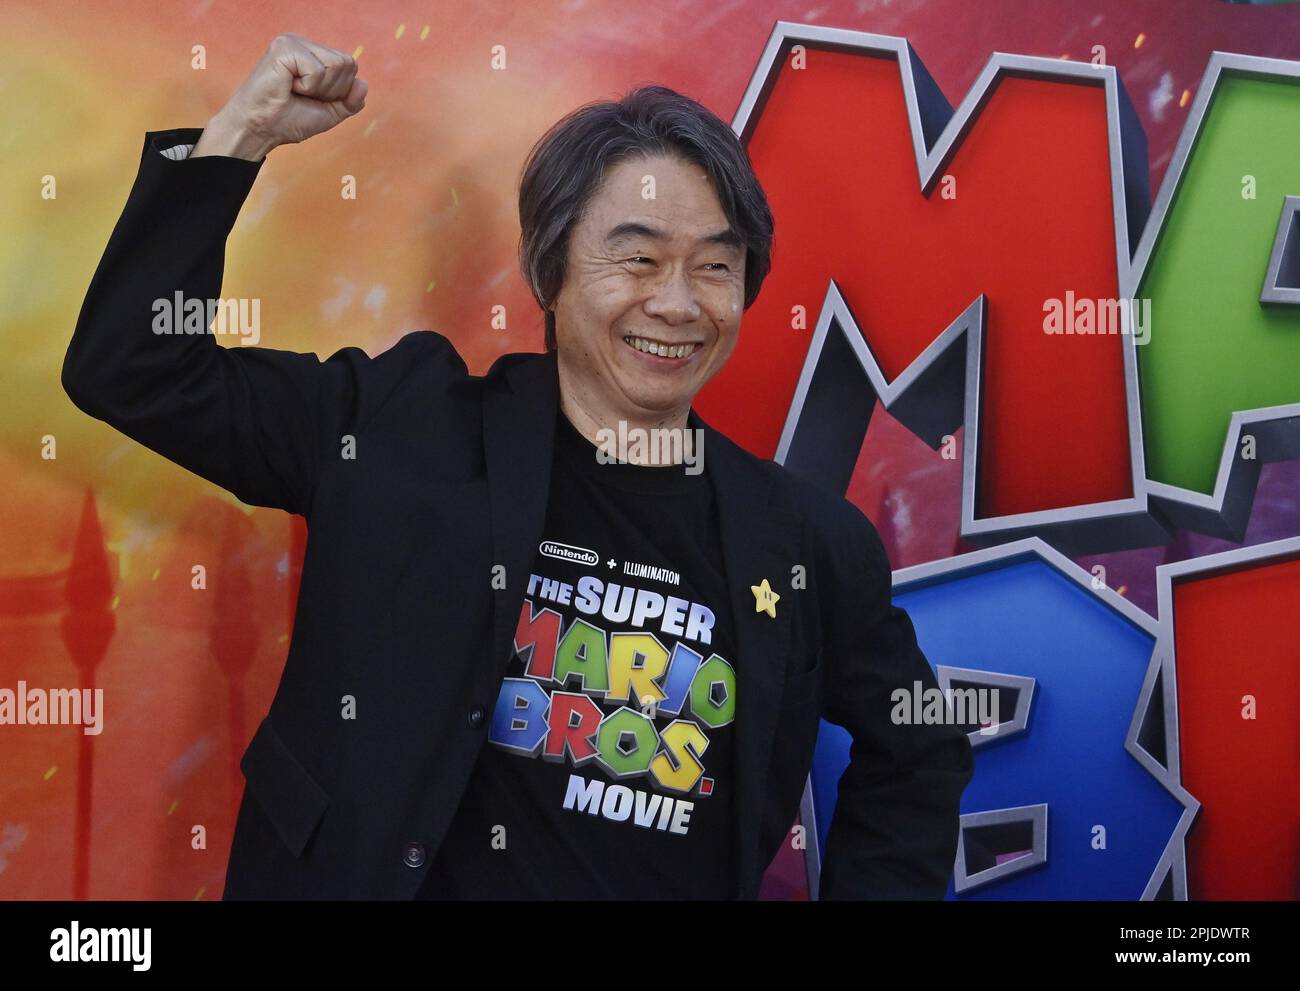 Los Angeles, United States. 01st Apr, 2023. Nintendo's Shigeru Miyamoto attends the premiere of the animated sci-fi fantasy comedy motion picture 'The Super Mario Bros. Movie' at Regal L.A. Live in Los Angeles on Saturday, April 1, 2023. Storyline: A Brooklyn plumber named Mario travels through the Mushroom Kingdom with a princess named Peach and an anthropomorphic mushroom named Toad to find Mario's brother, Luigi, and to save the world from a ruthless fire-breathing Koopa named Bowser. Photo by Jim Ruymen/UPI Credit: UPI/Alamy Live News Stock Photo